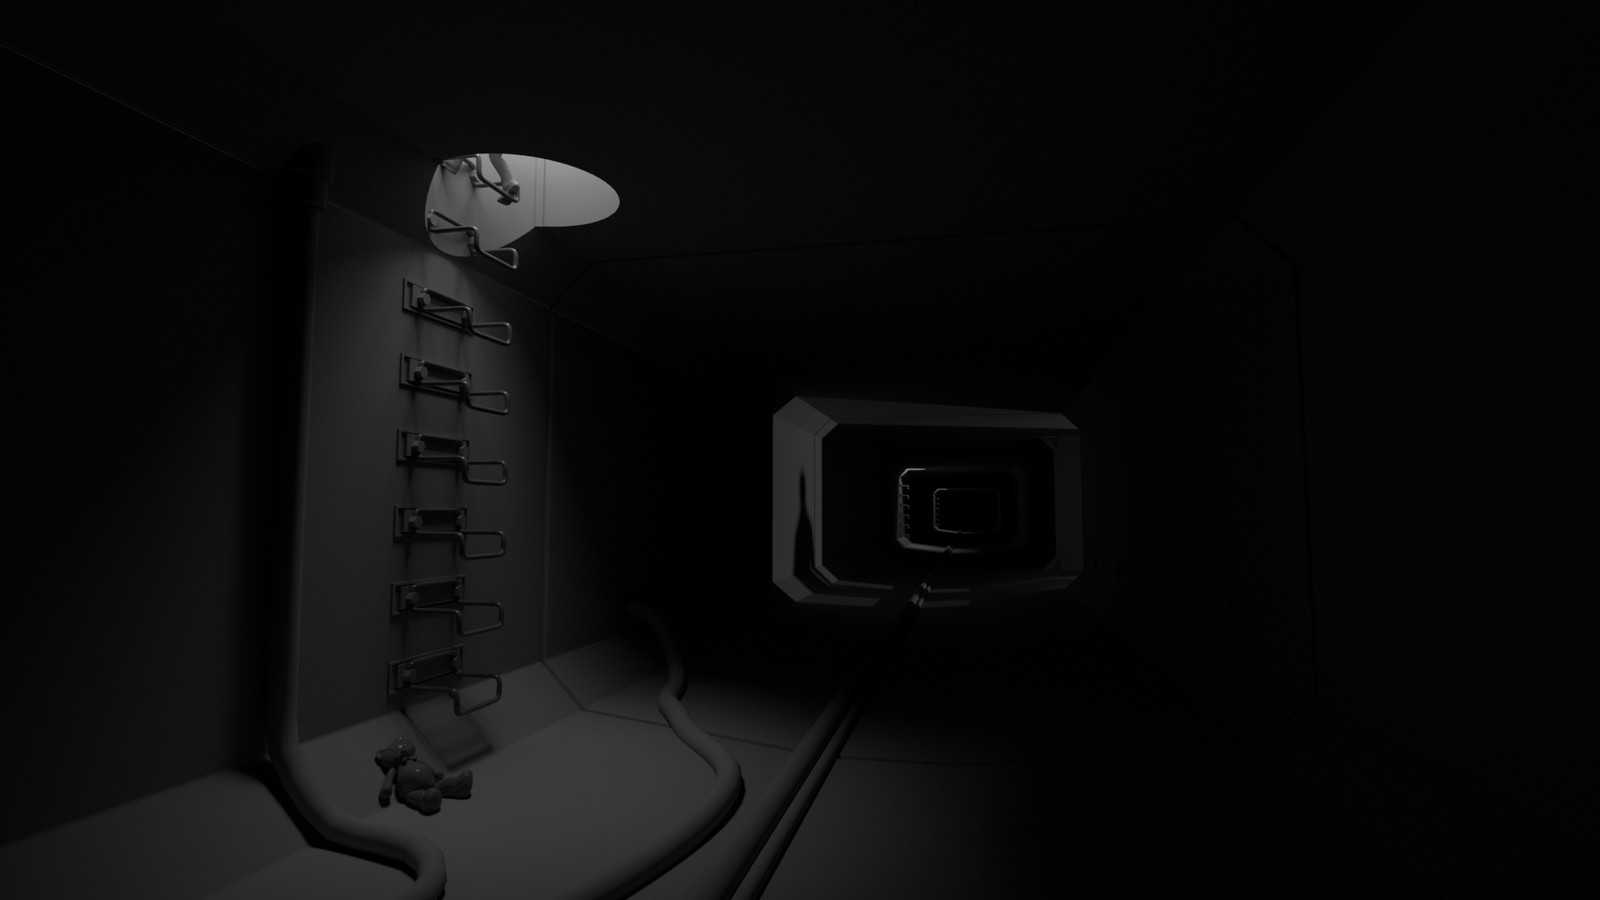 Inspired by film noir and trying to tell a story with very little.
Phrase: Desperate Hallway
Time: 3 hours